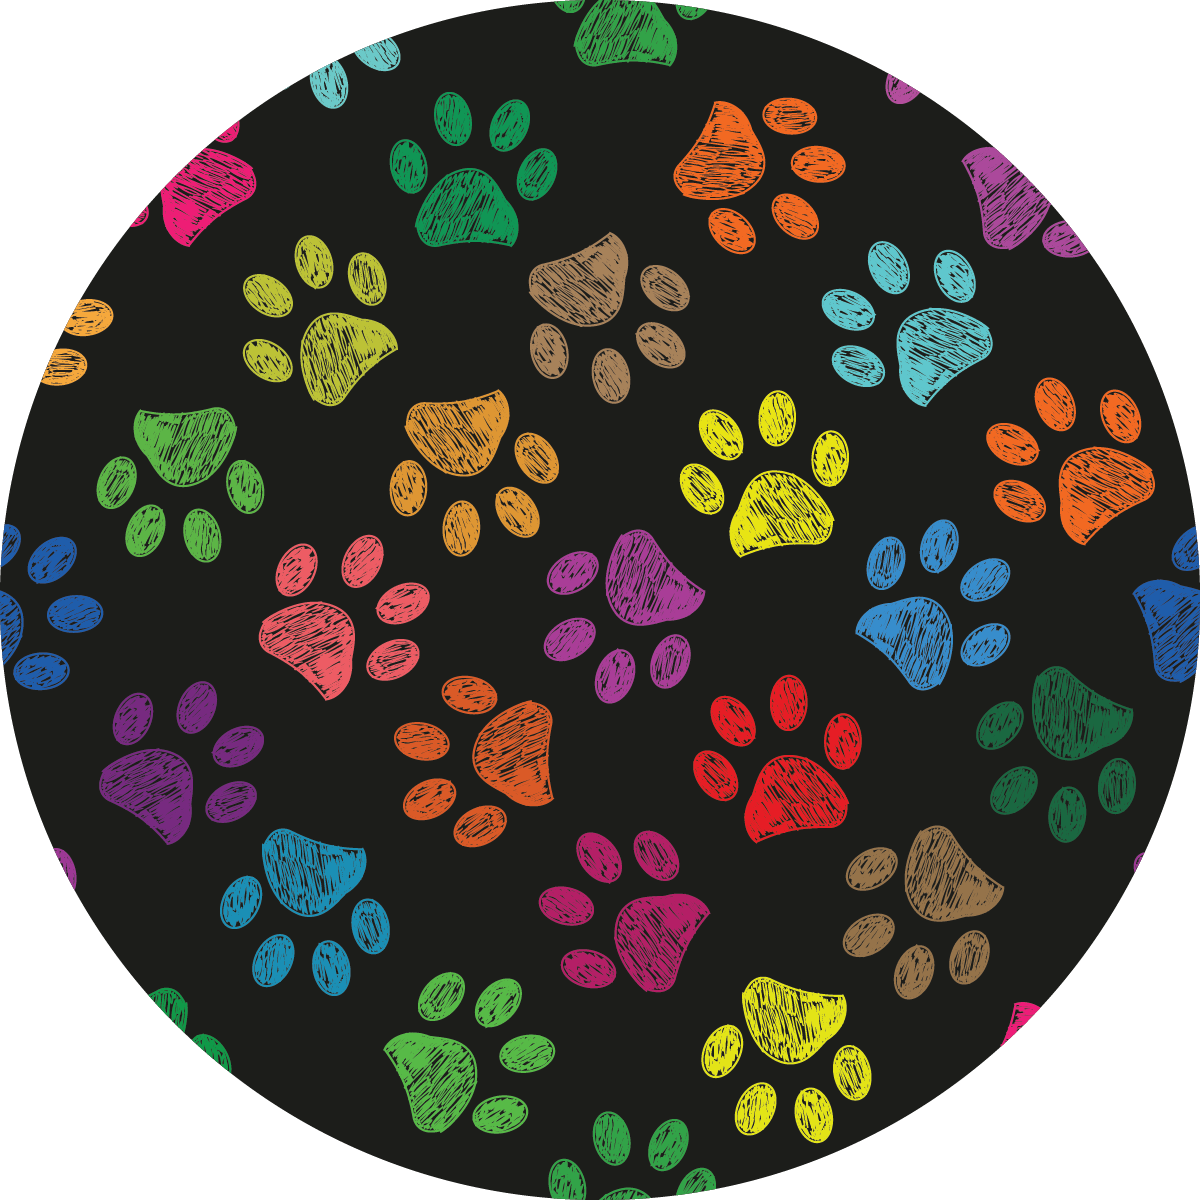 #74 Multi Color Paw Dark Christmas Ornament Backing Sticker - Supply for Making Custom Ornaments